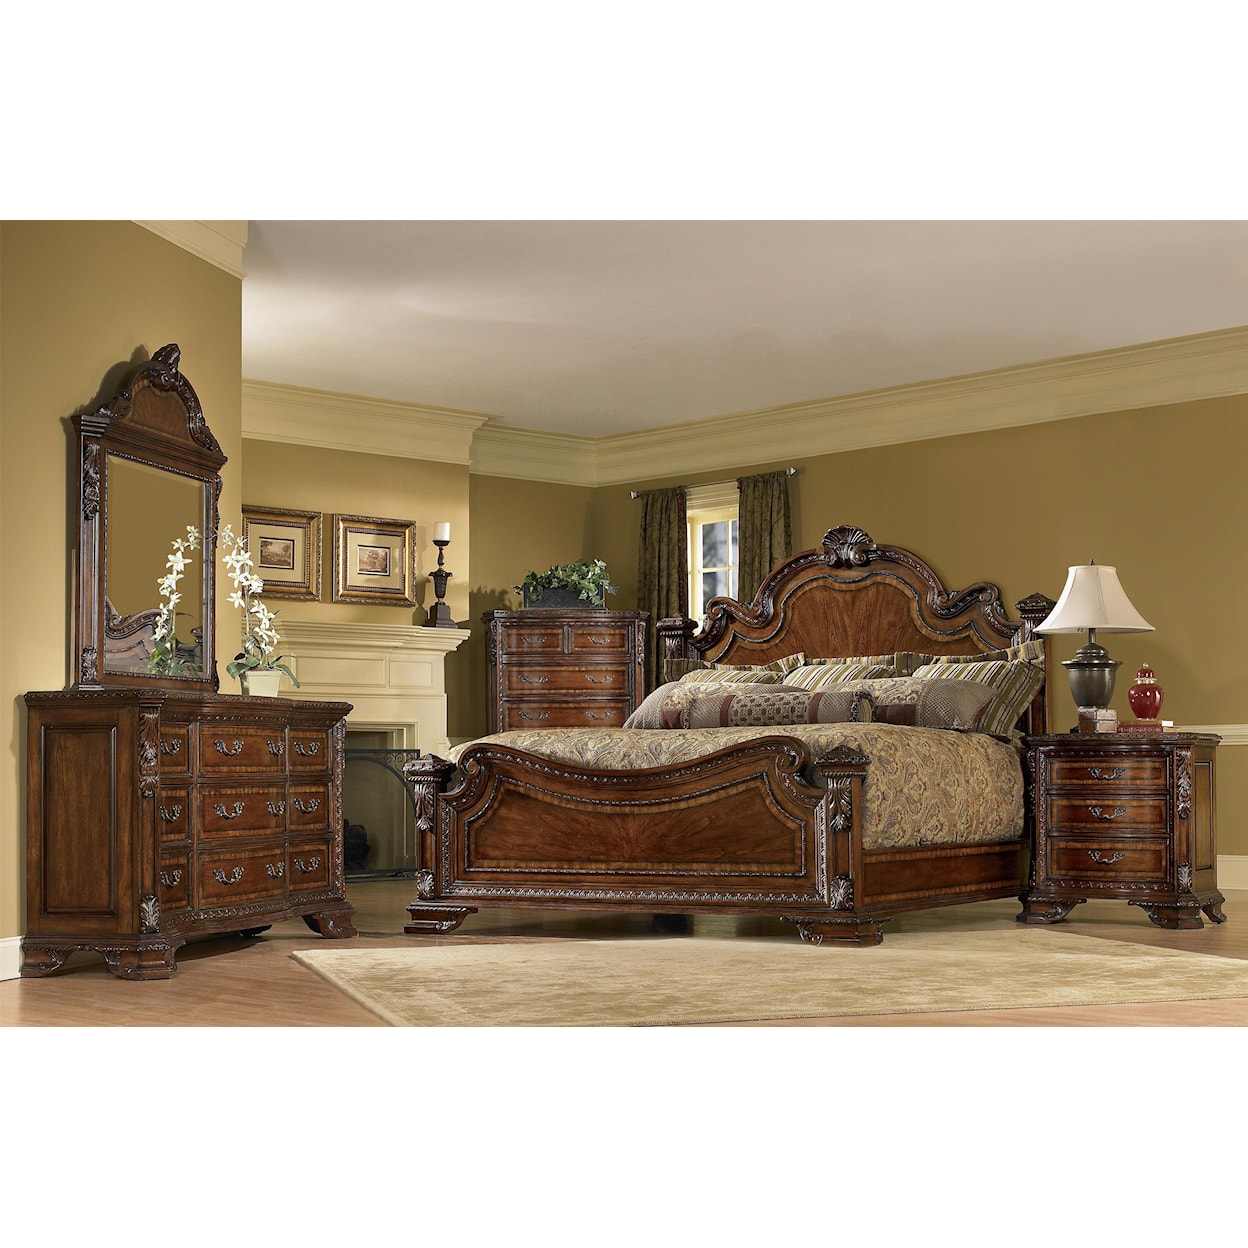 A.R.T. Furniture Inc Old World California King Bedroom Group